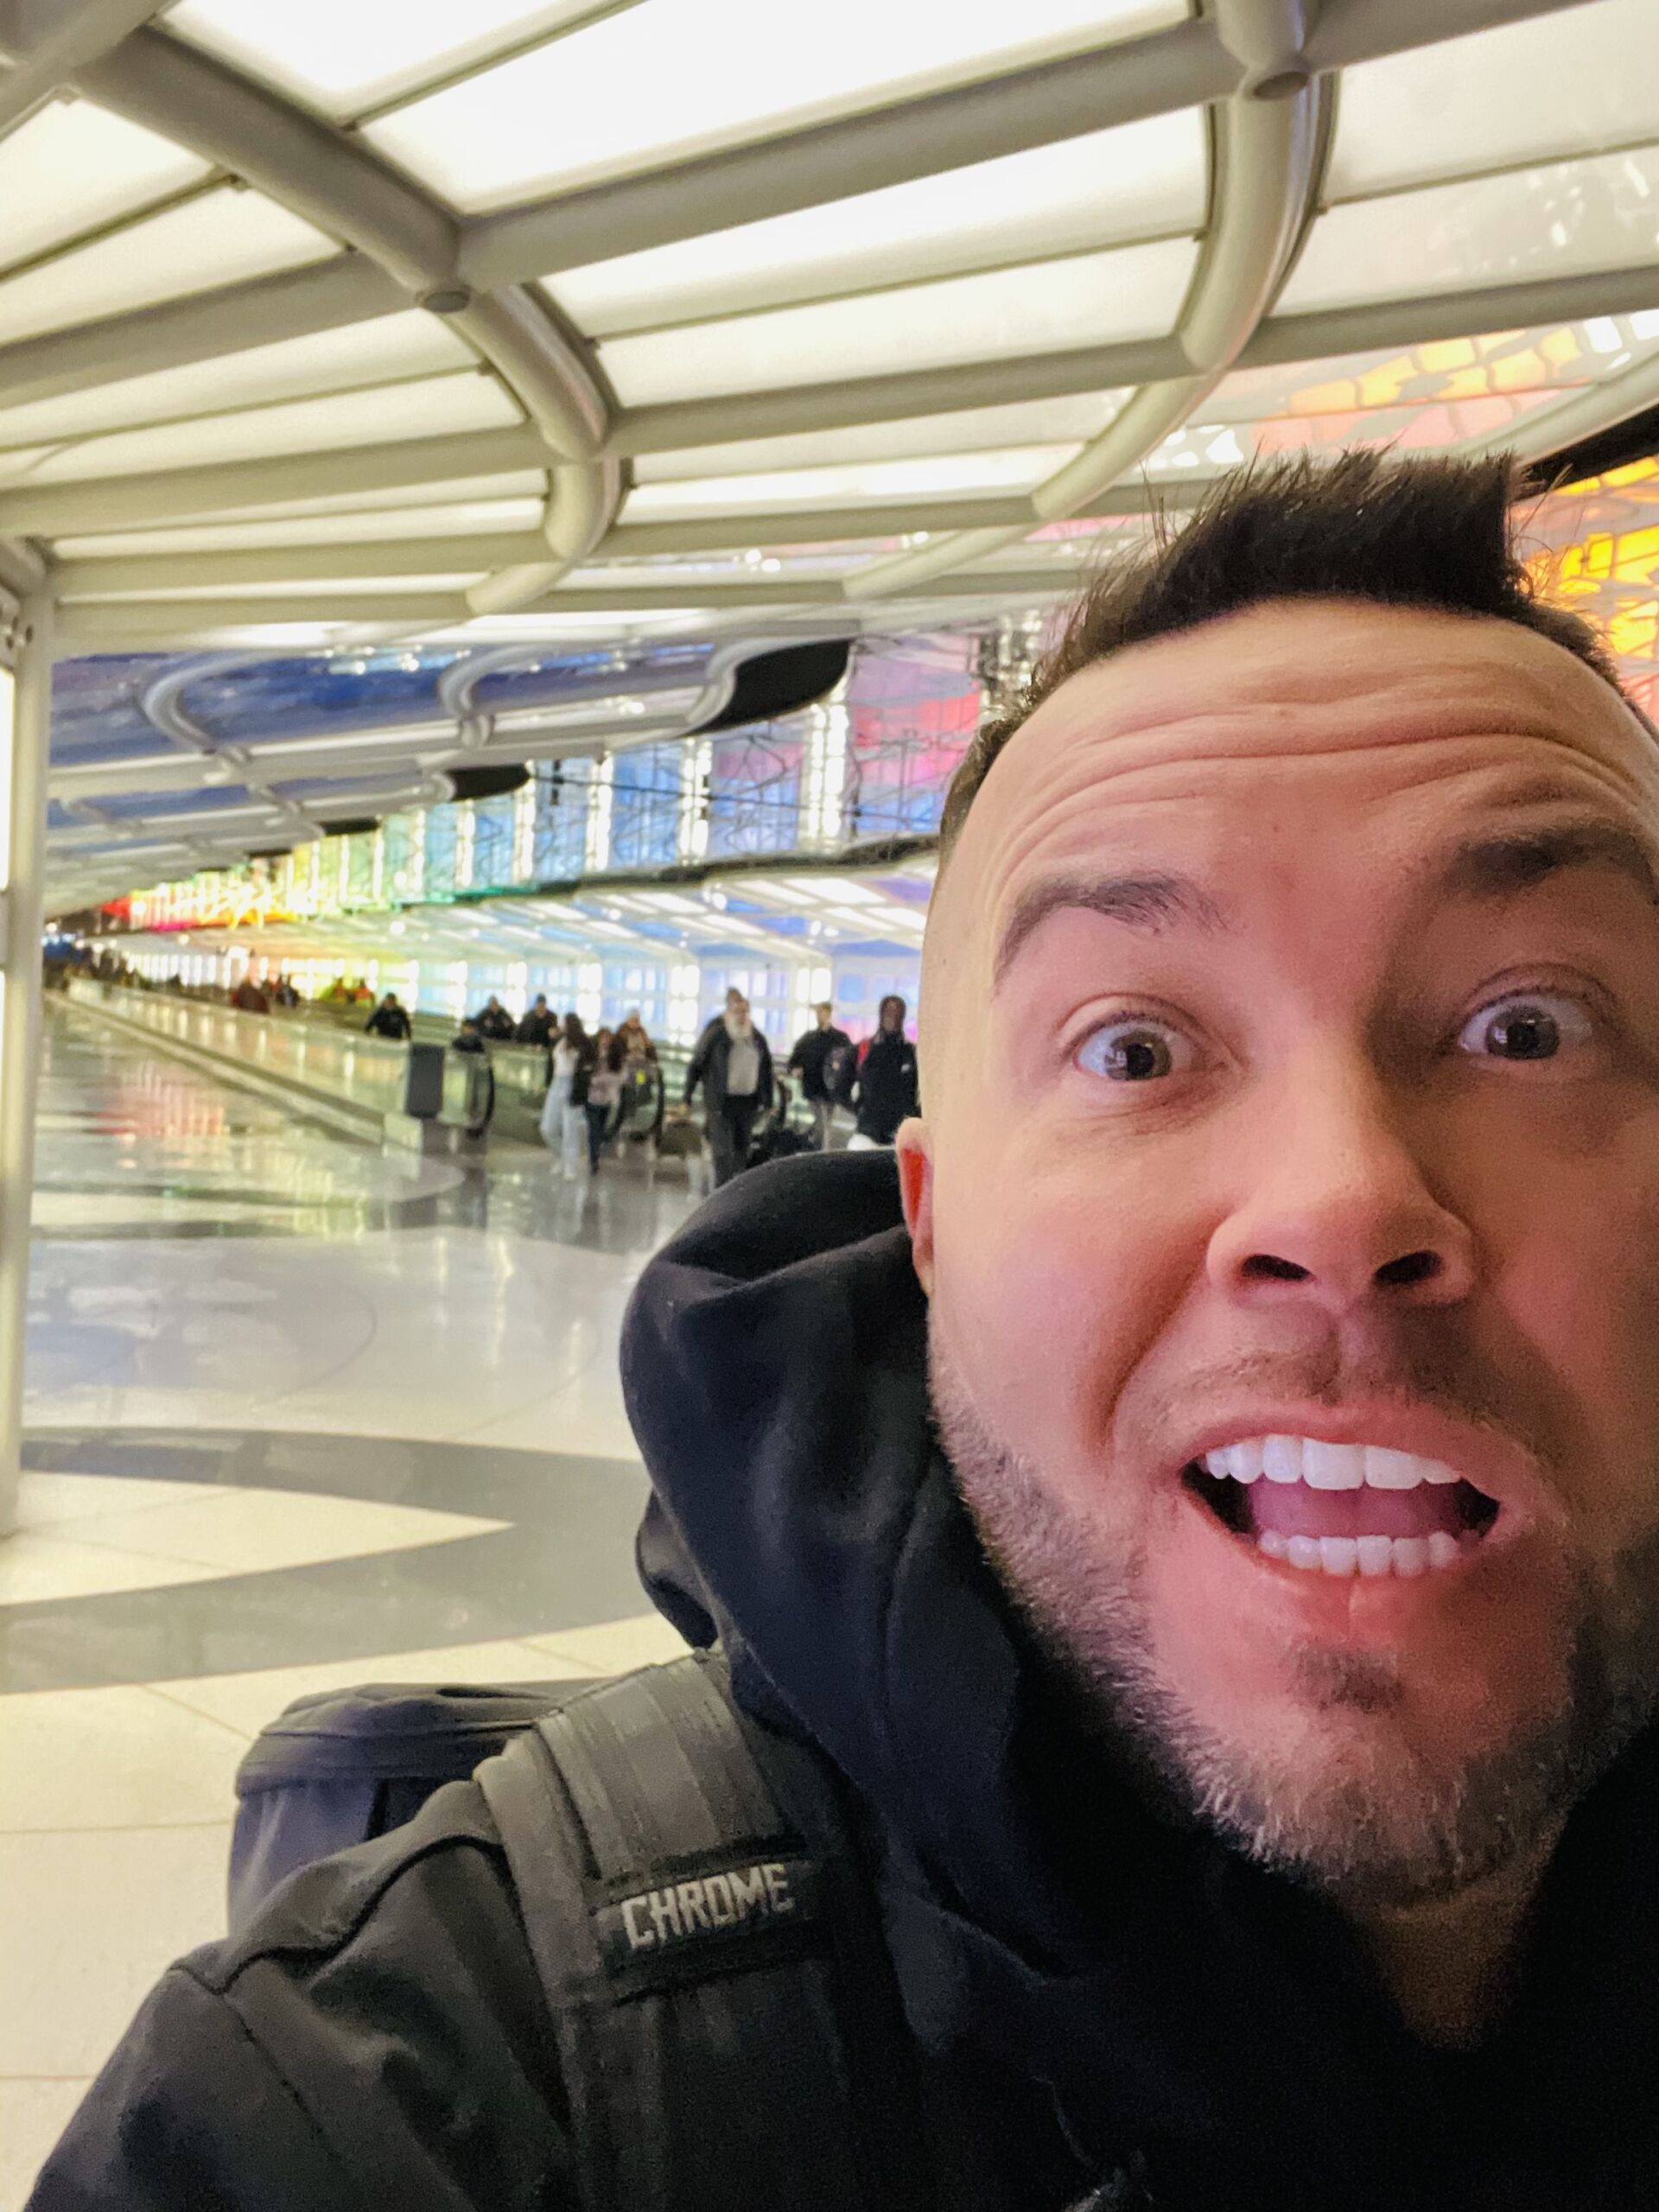 Photo is a humorous selfie of Chase Johnson-Espinoza in an airport. He has an excited and funny facial expression on, with his eyebrows raised high and his mouth and eyes wide open.